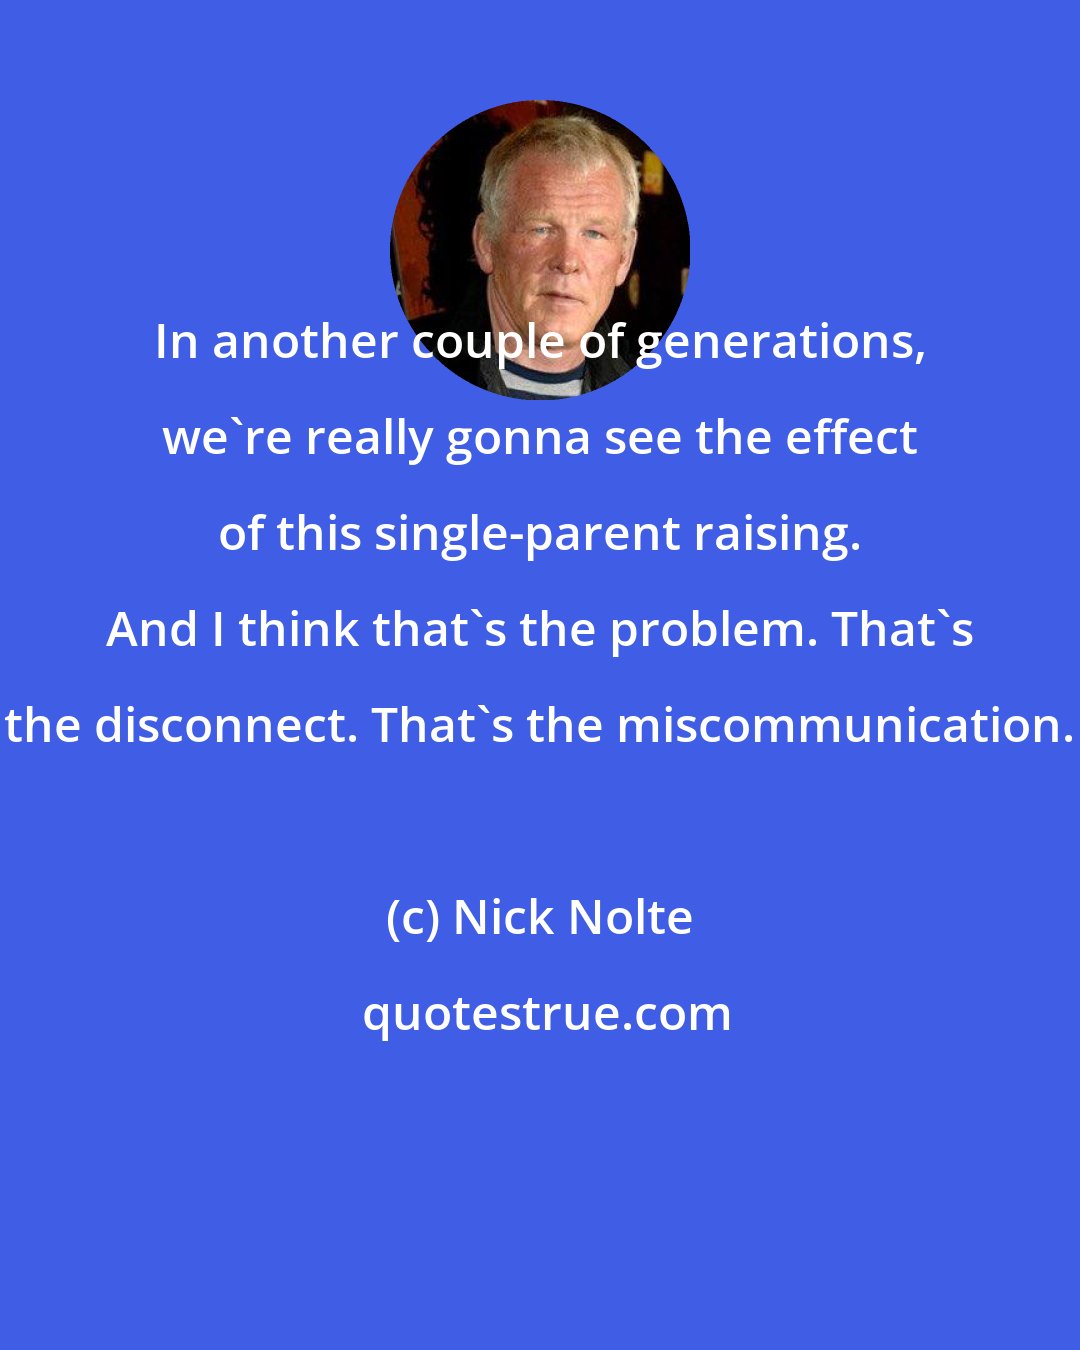 Nick Nolte: In another couple of generations, we're really gonna see the effect of this single-parent raising. And I think that's the problem. That's the disconnect. That's the miscommunication.